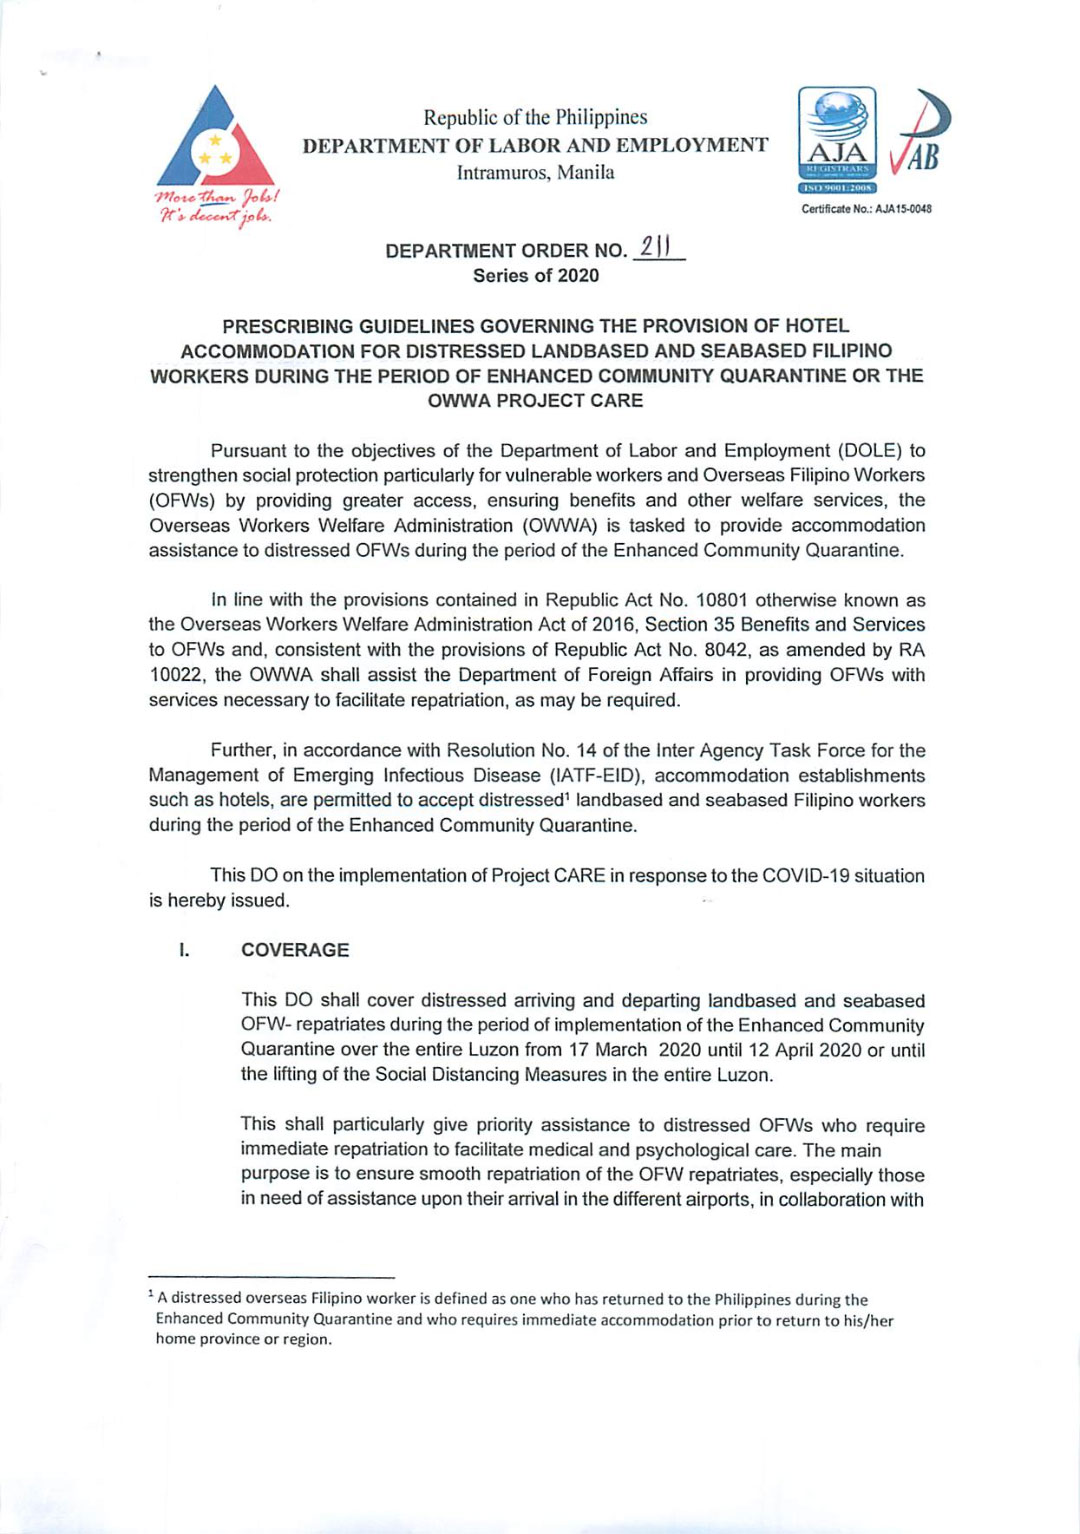 dole-department-order-211-page-01.jpg